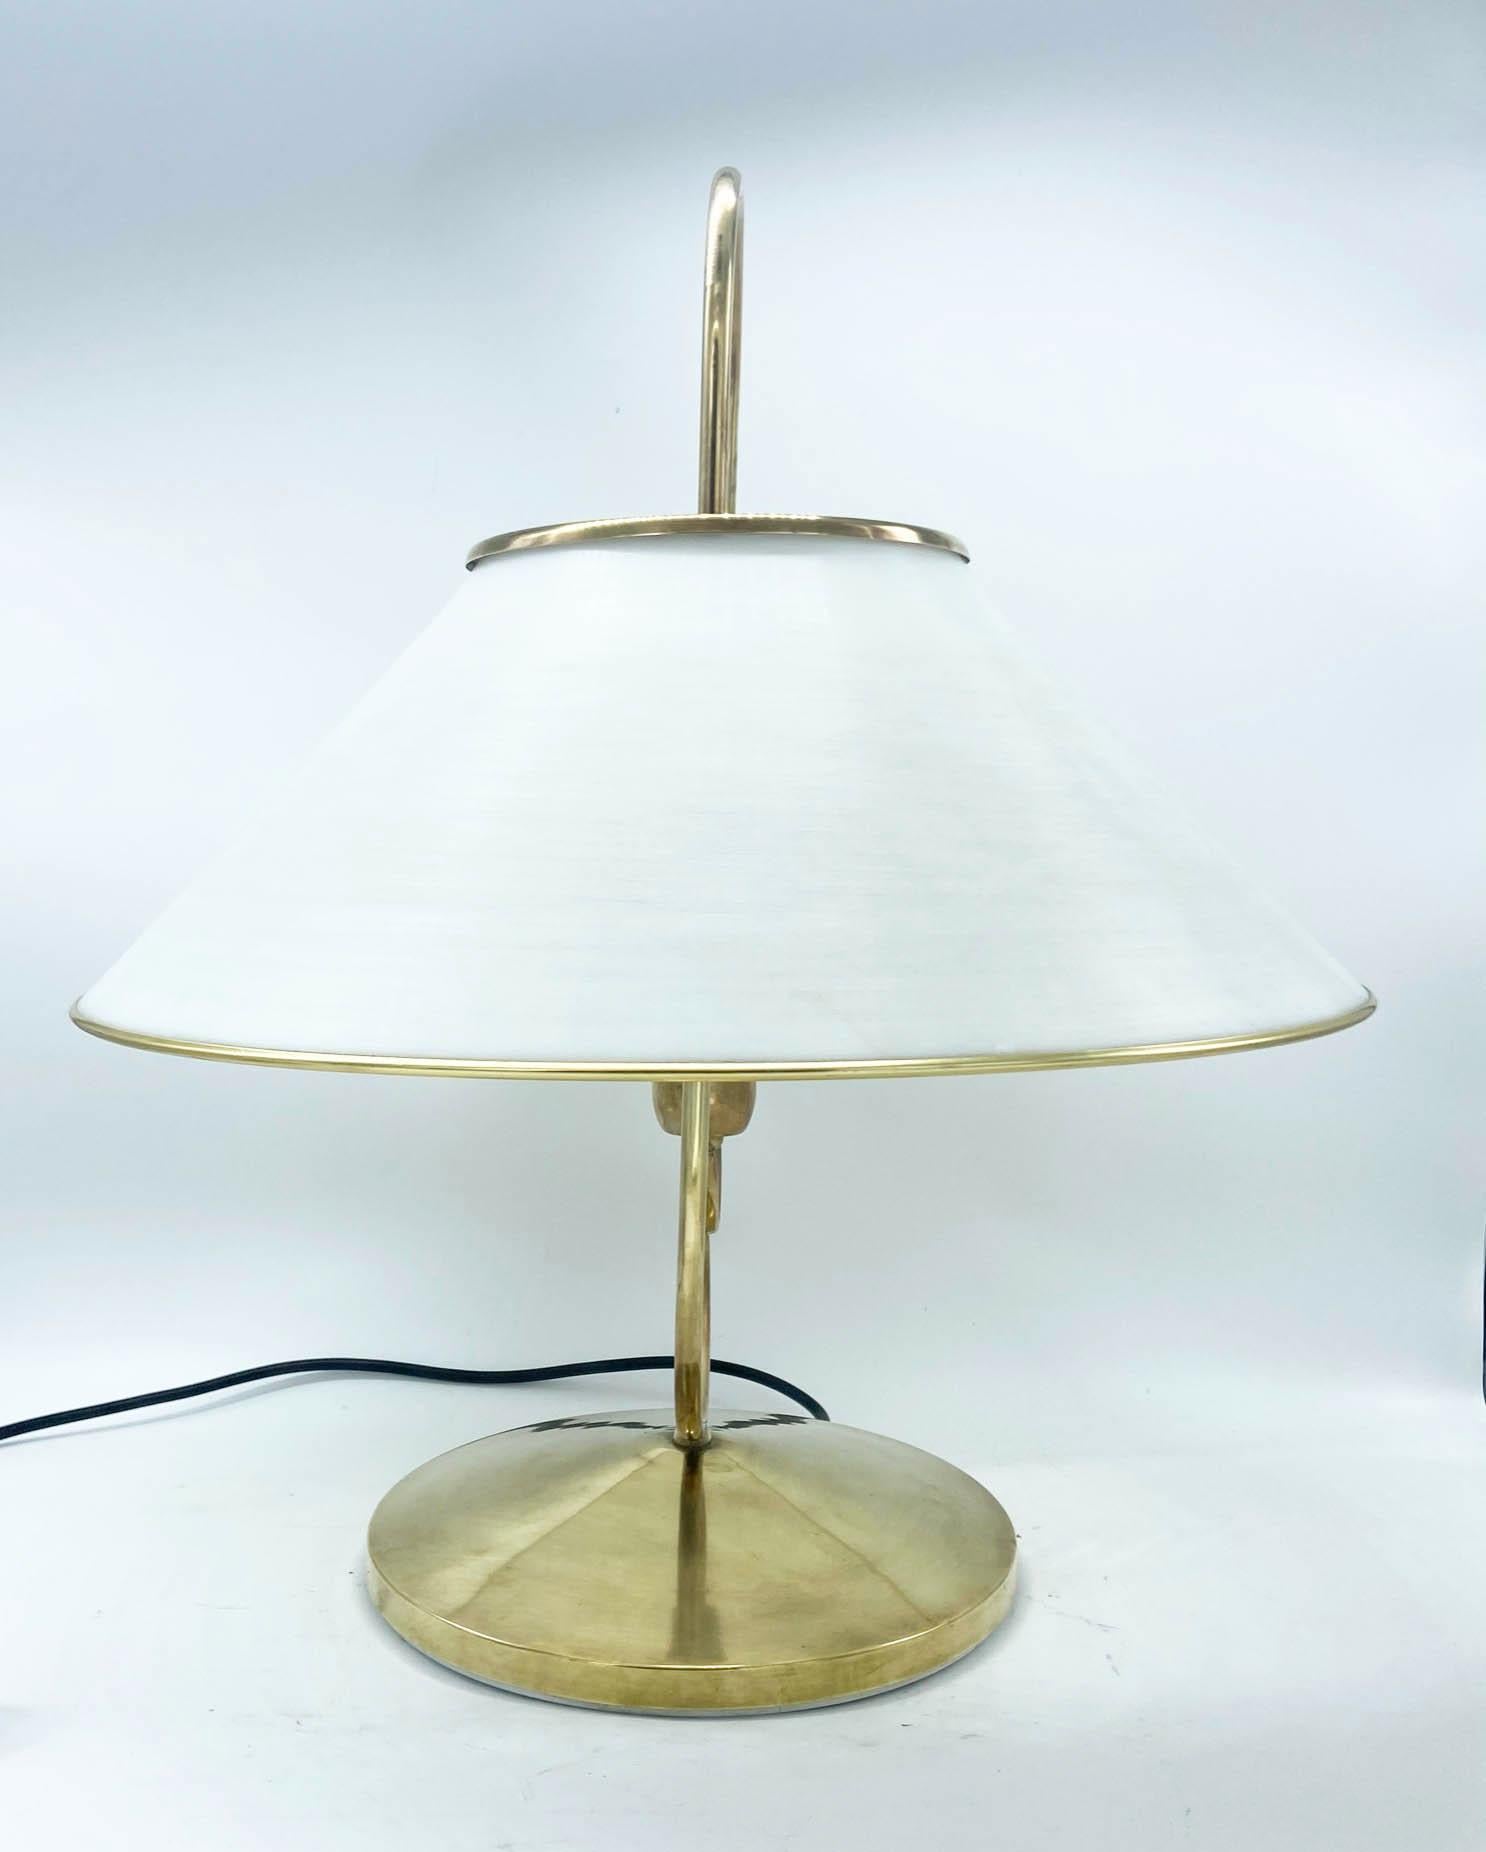 Rare and particular table lamp made of brass with white perspex diffuser.
 The brass base has a particular shape that culminates at the top with a handle that comes out of the diffuser. 
This lamp is a simple yet elegant design that will fit